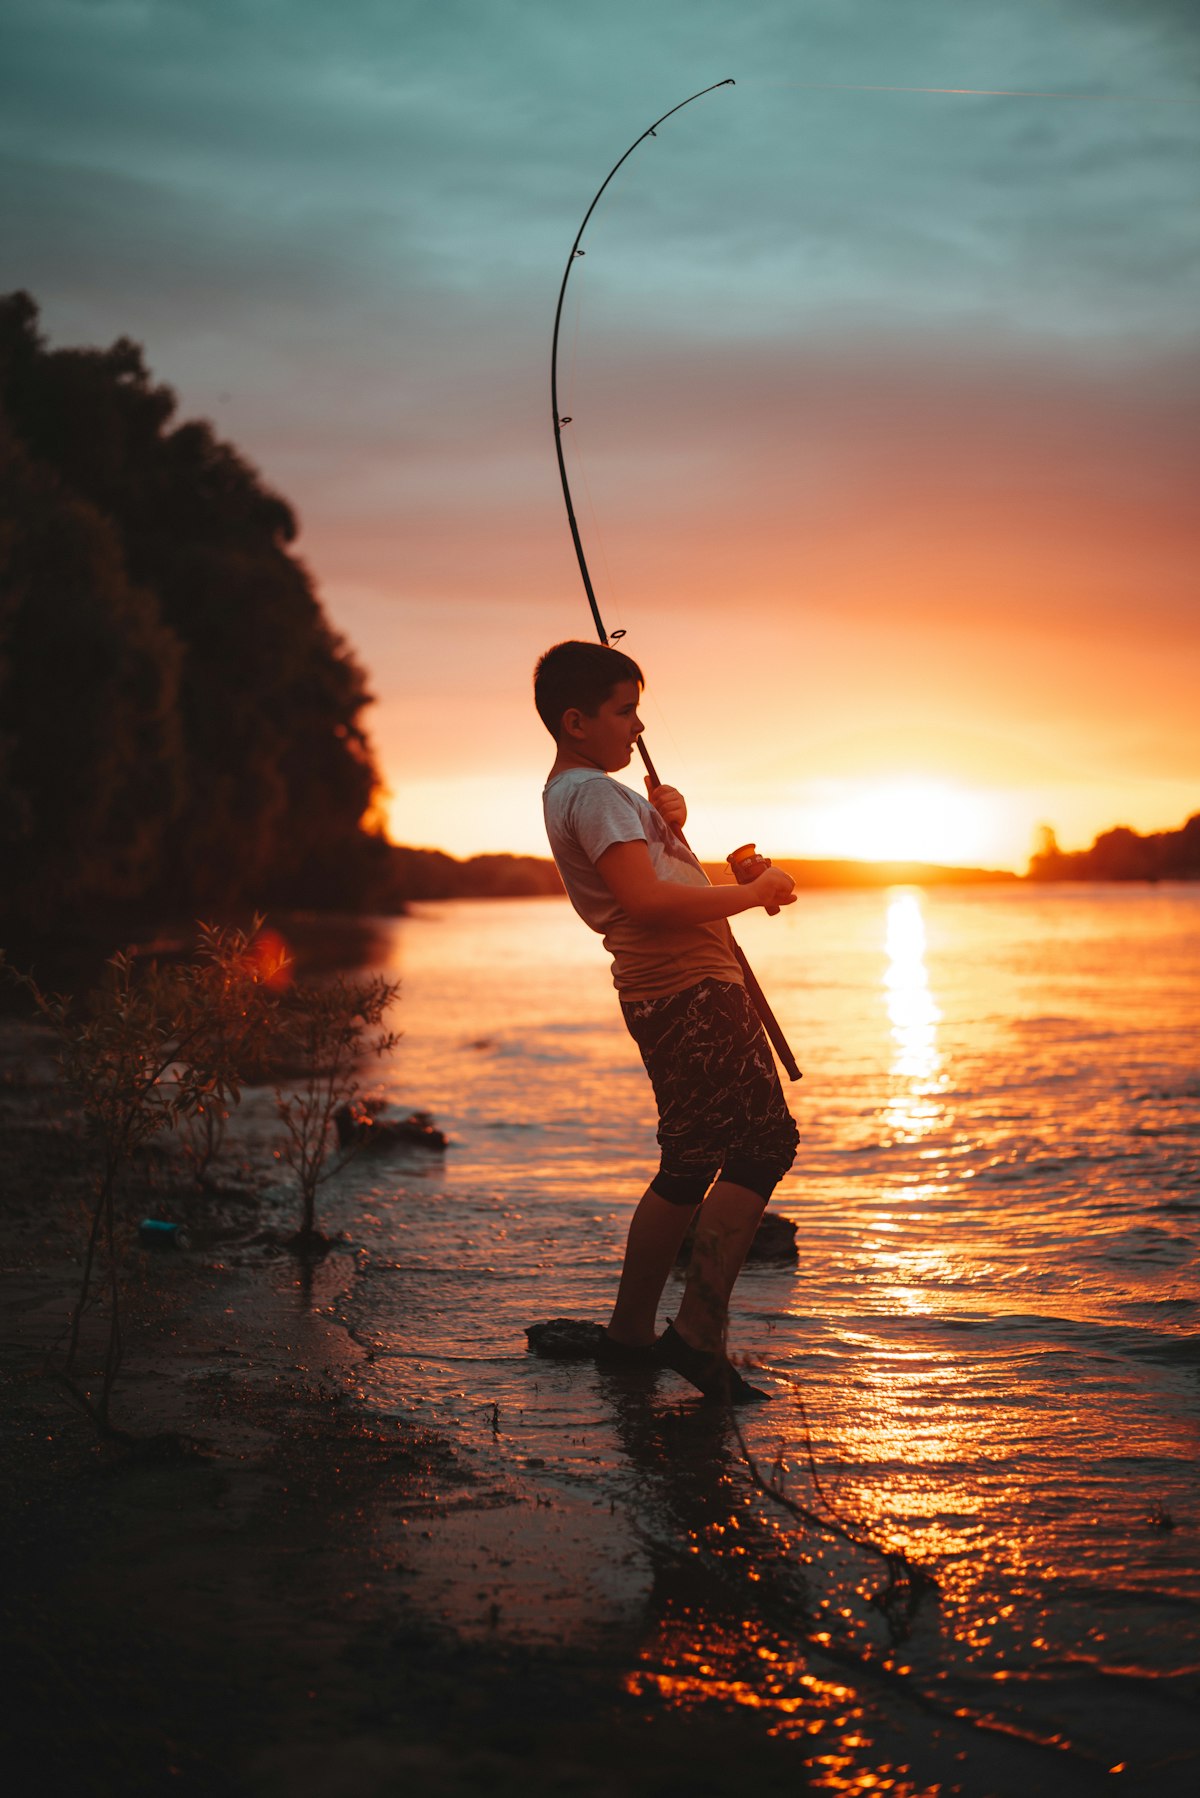 Young boy with a fishing pole trying to reel in a catch.